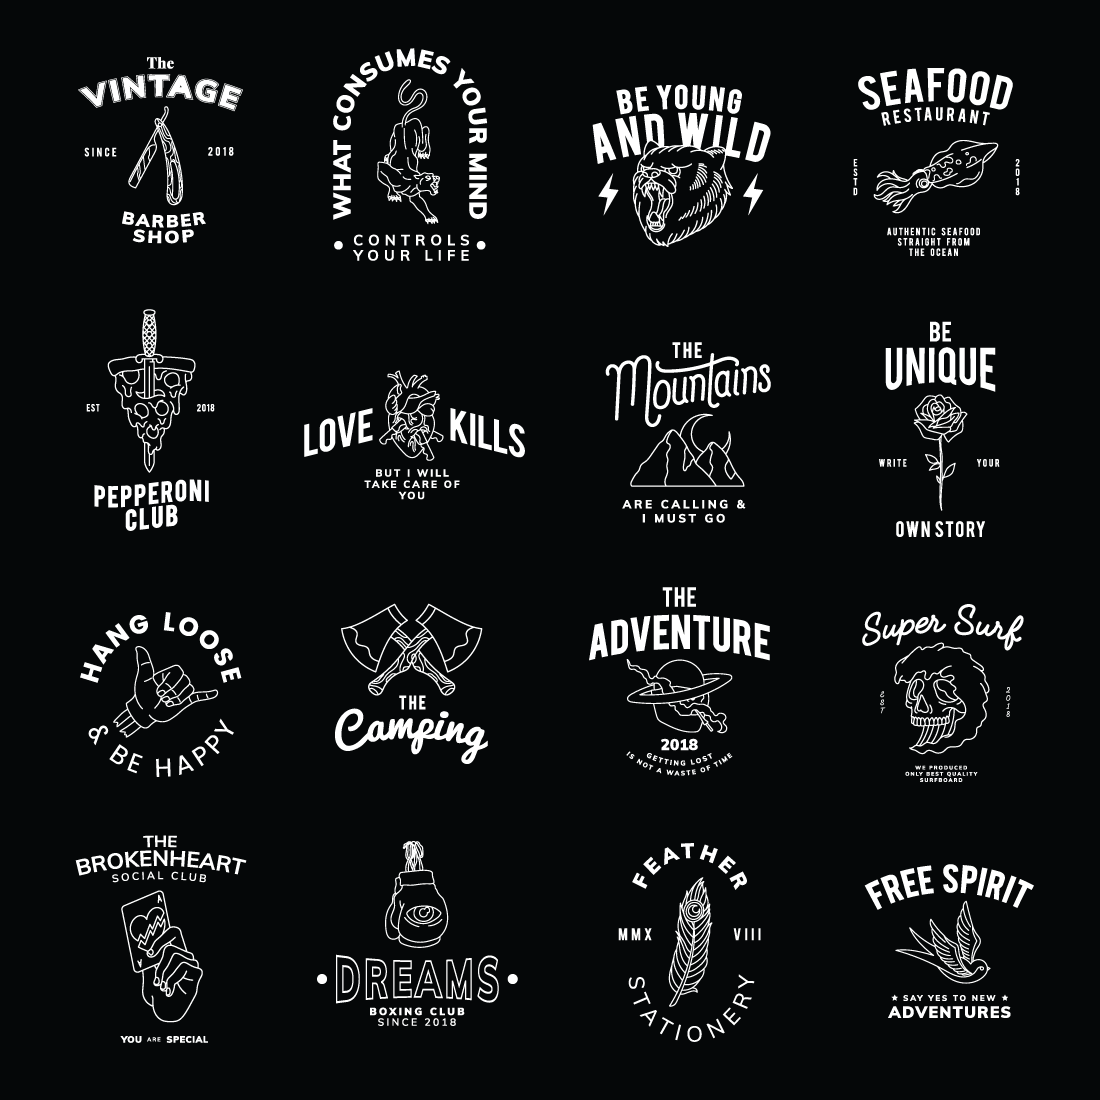 16 unique typography t shirts design and Set of vintage badges design vector 0nly 9 $ cover image.